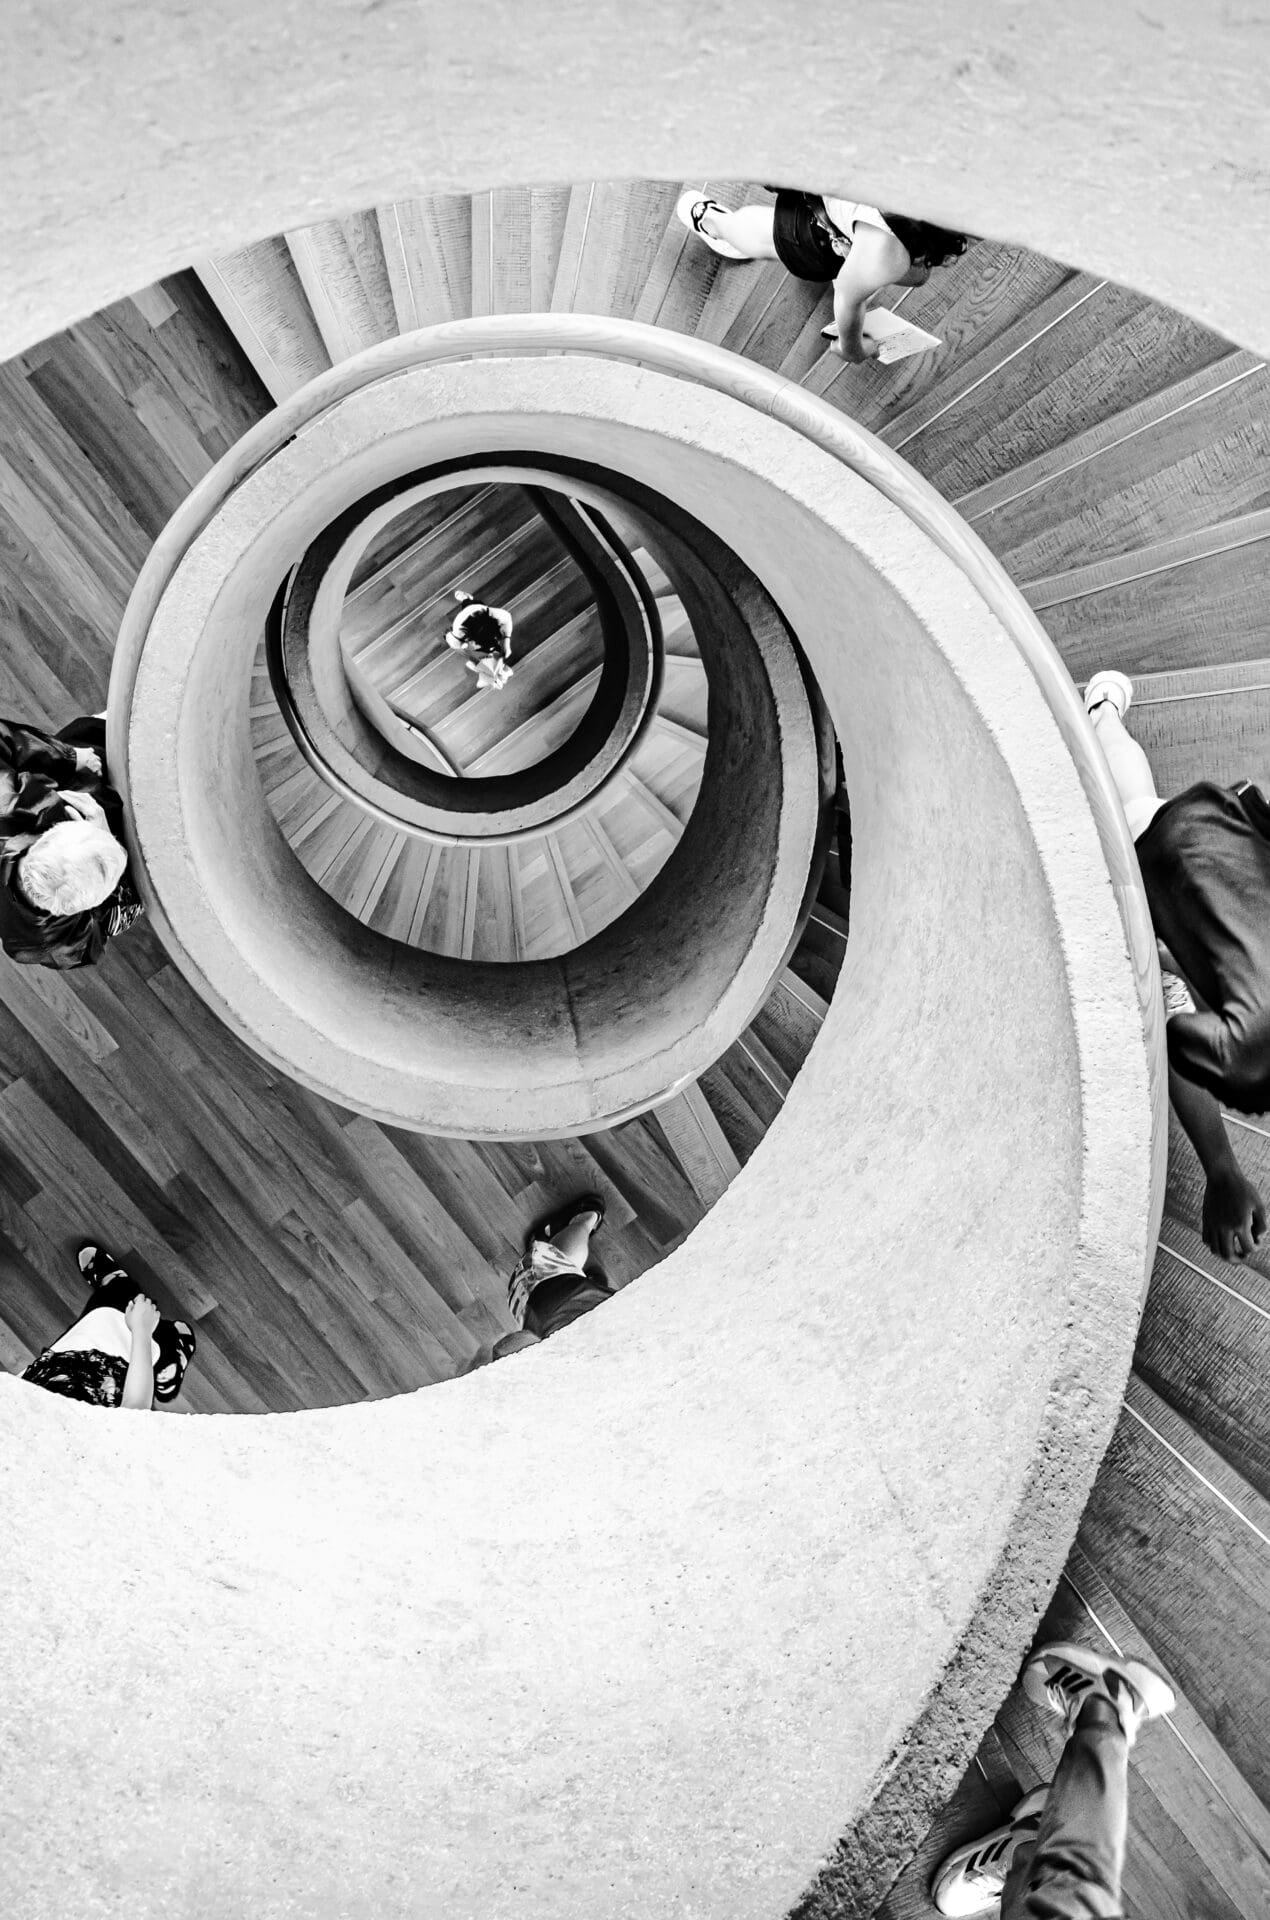 Jason Au | A perfectly timed moment captured at the iconic spiral staircase at Tai Kwun, a contemporary art centre in Hong Kong